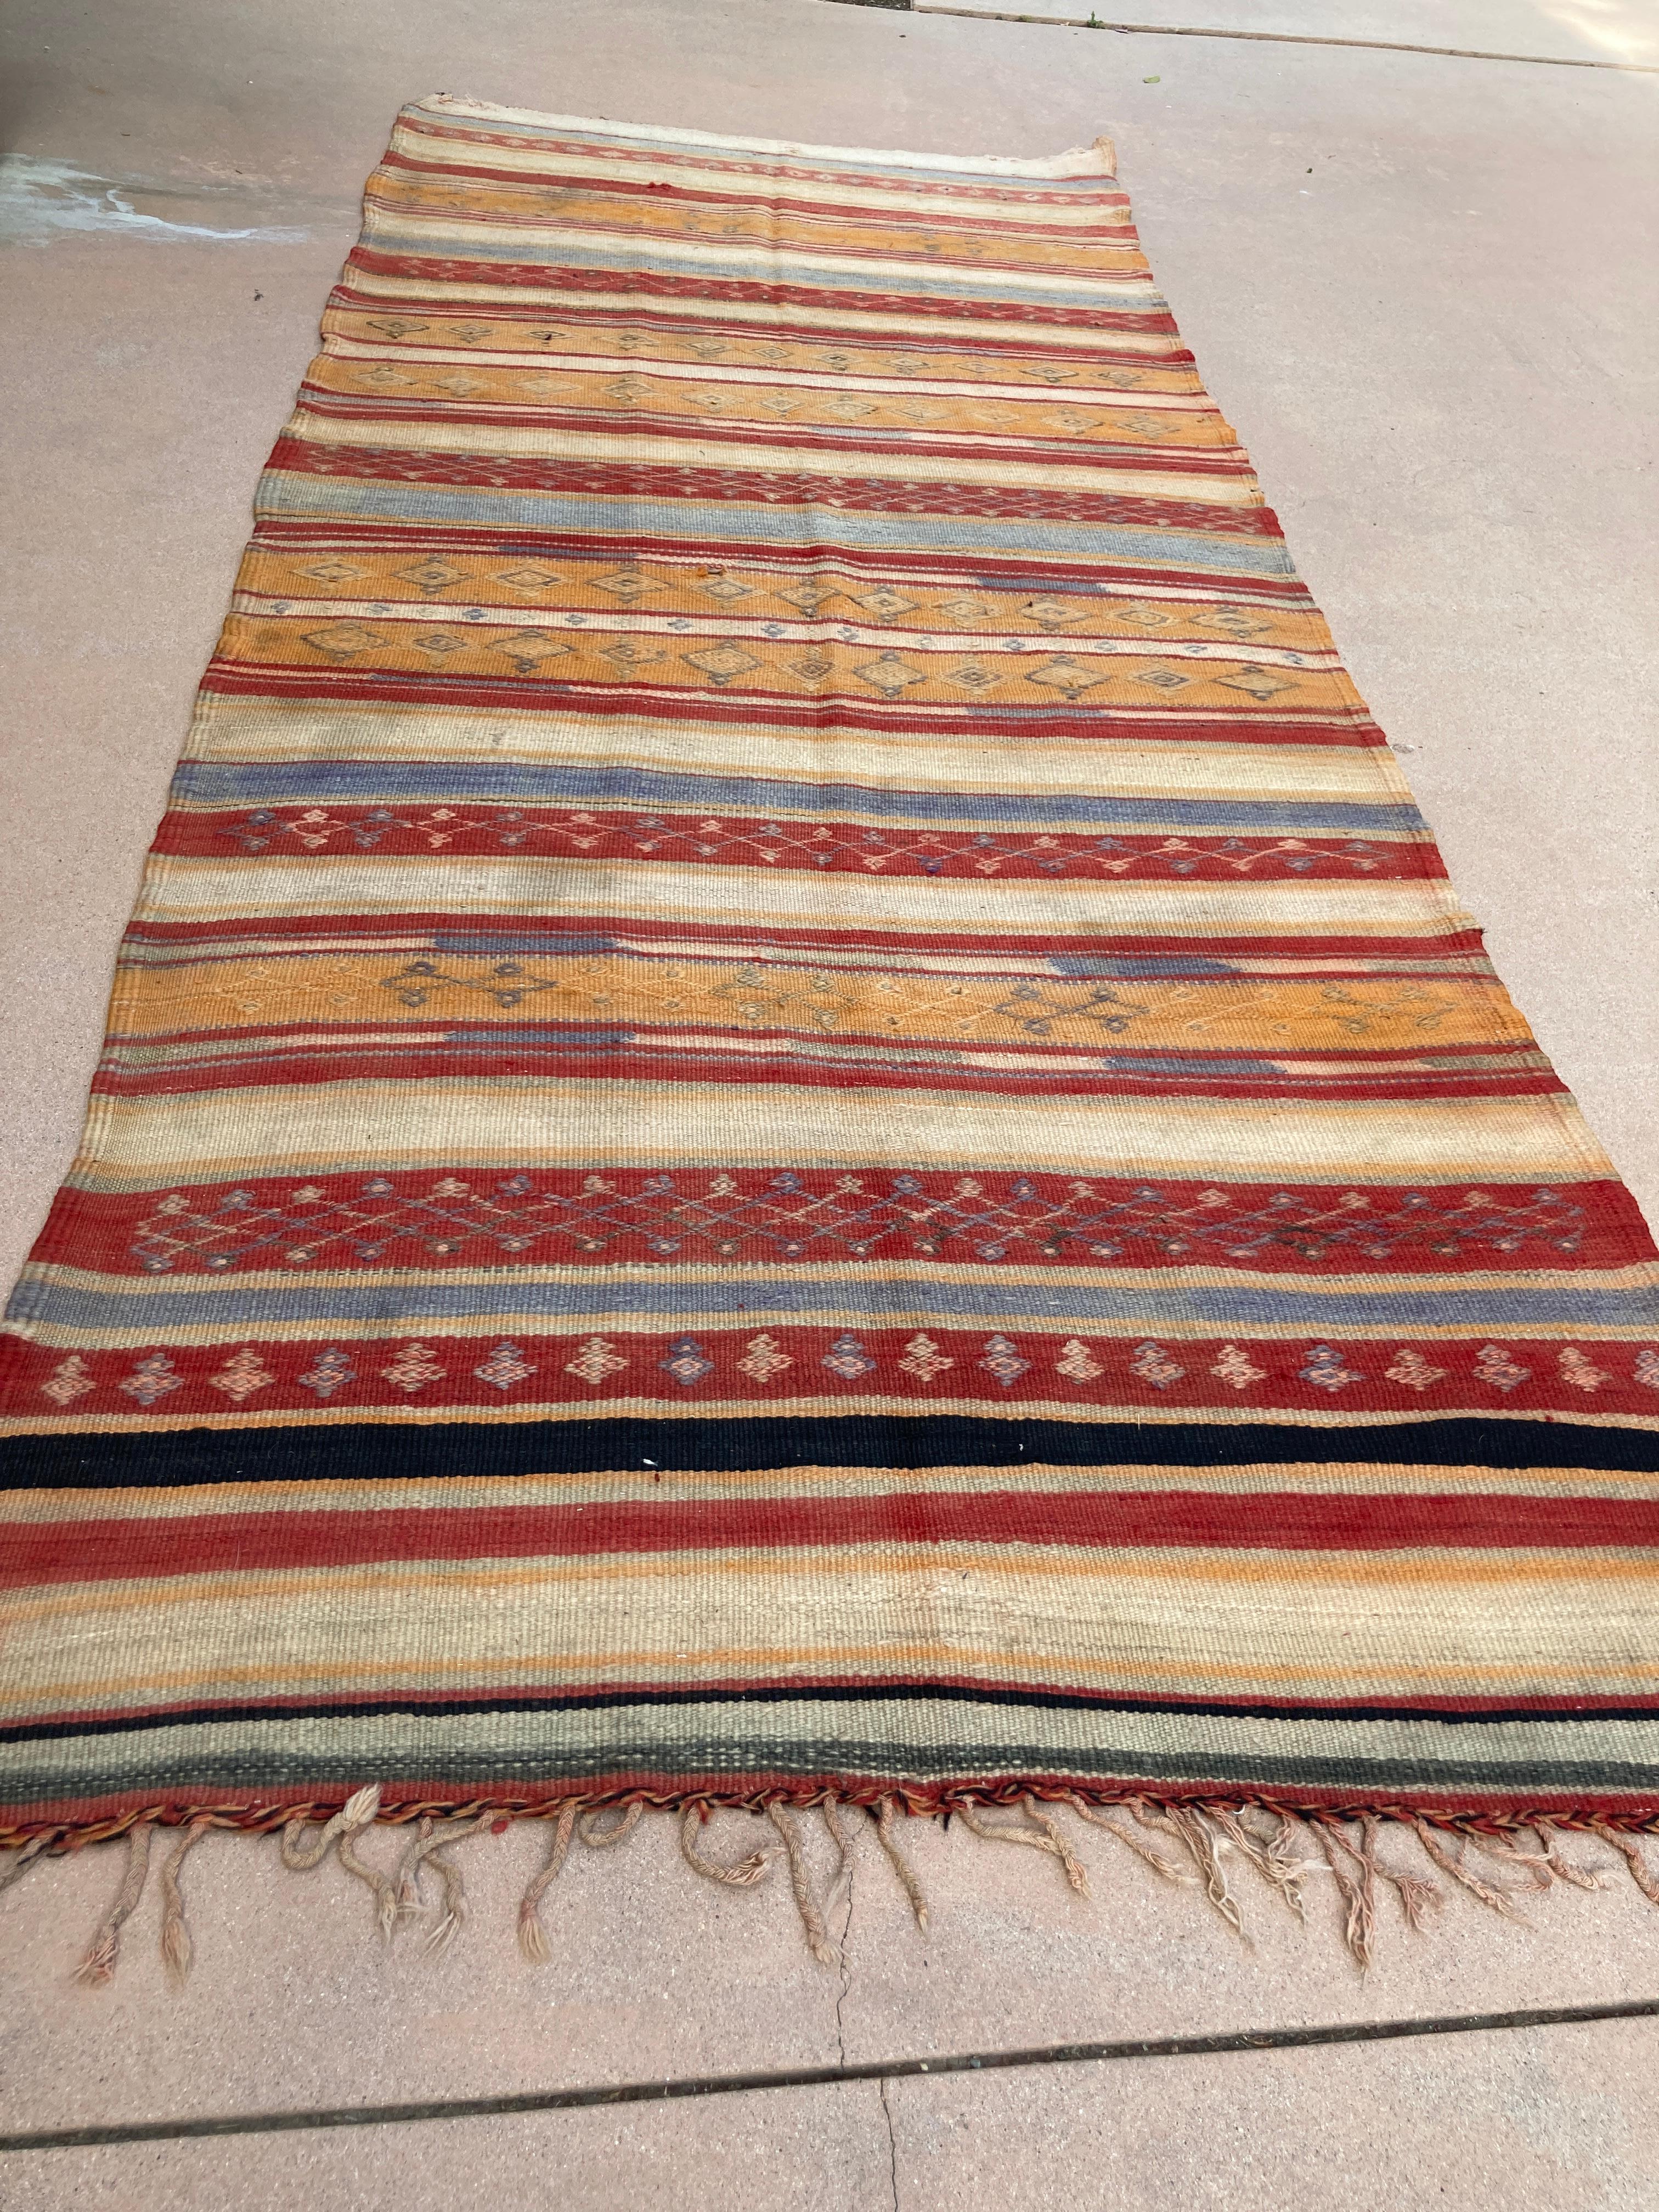 1960s Moroccan Rug Ethnic Flat Hand-woven Kilim  For Sale 7